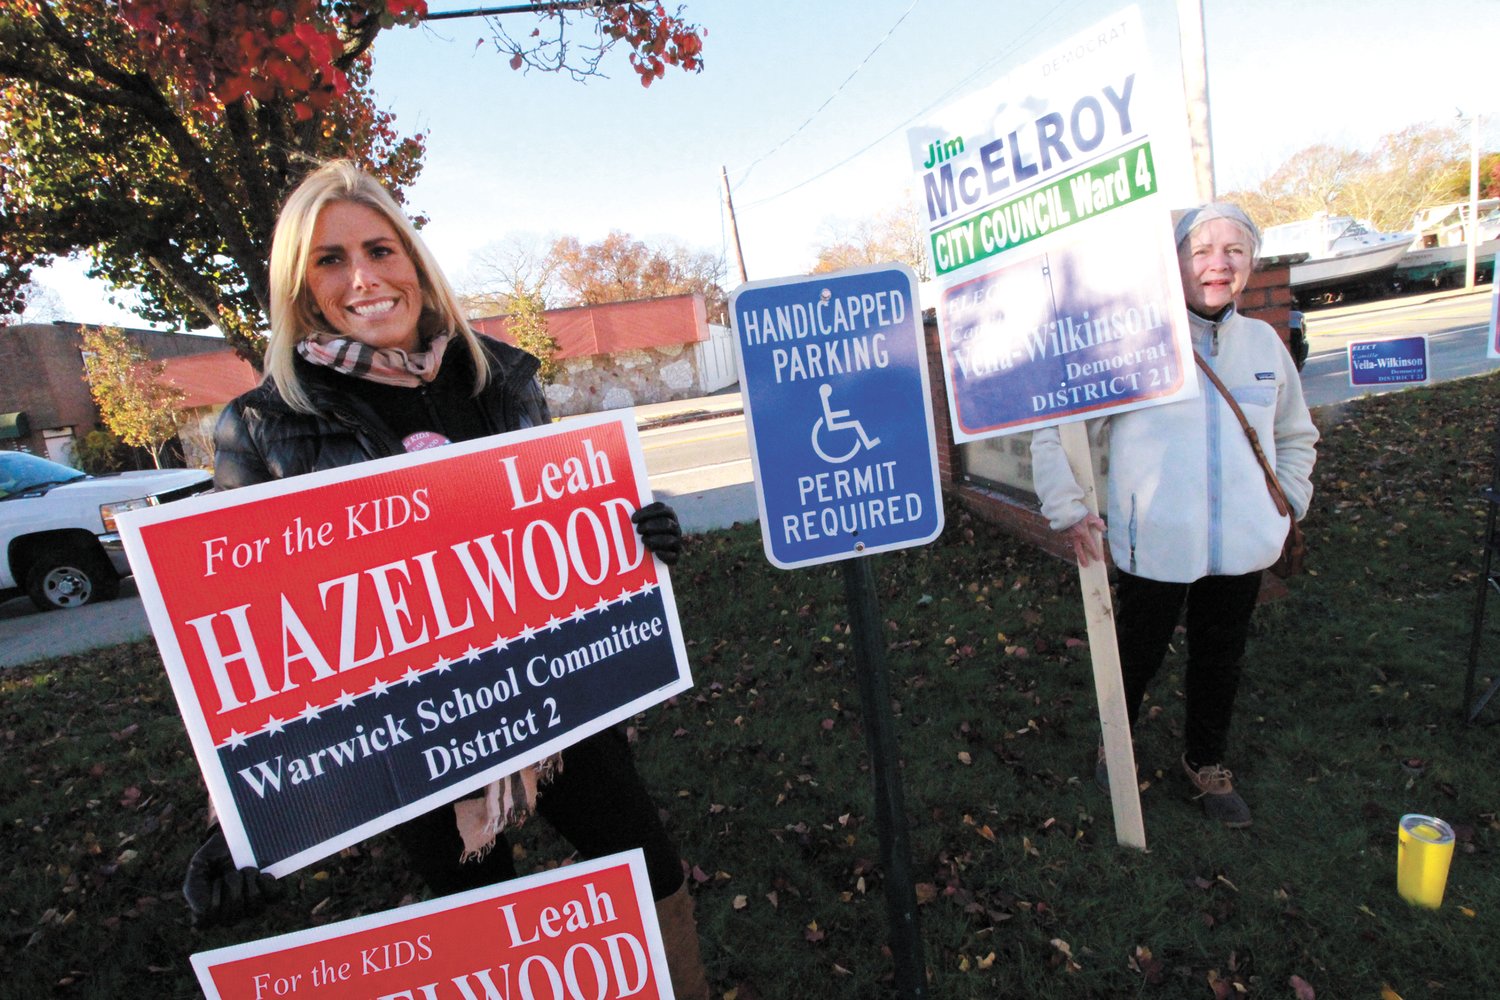 GREETING VOTERS: Rachel Hazelwood, daughter of  District 2 School Committee candidate Leah Hazelwood and Ann Gooding, who is supporting Democratic candidate Camille Vella-Wilkinson for reelection welcomed the morning sun outside the William Shields Post in Conimicut.